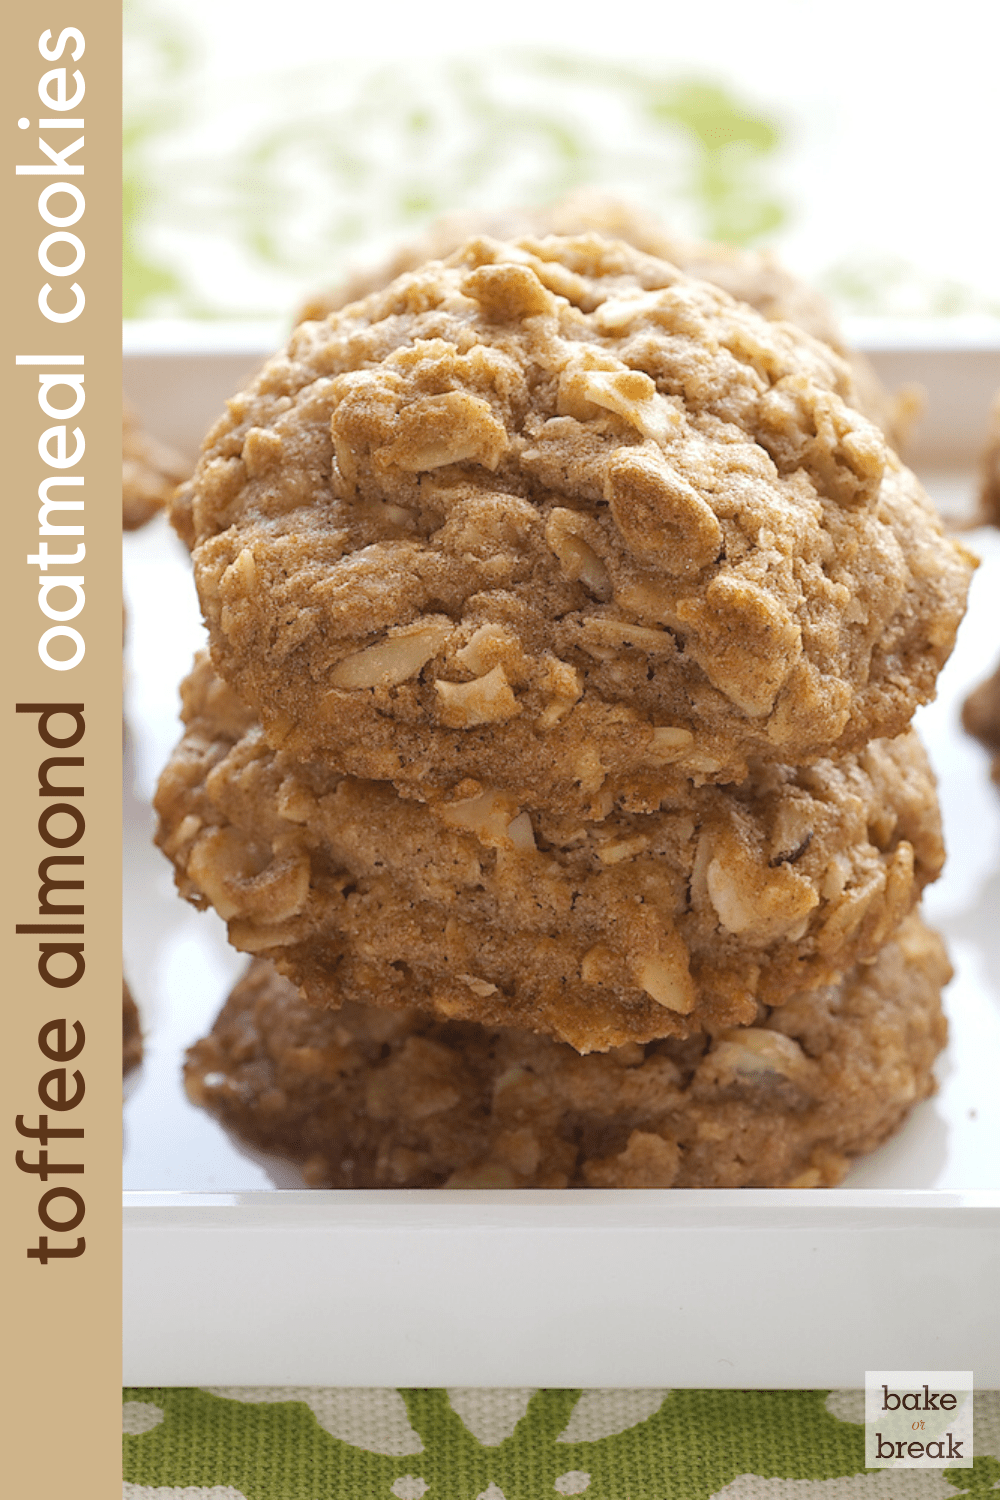 Toffee Almond Oatmeal Cookies